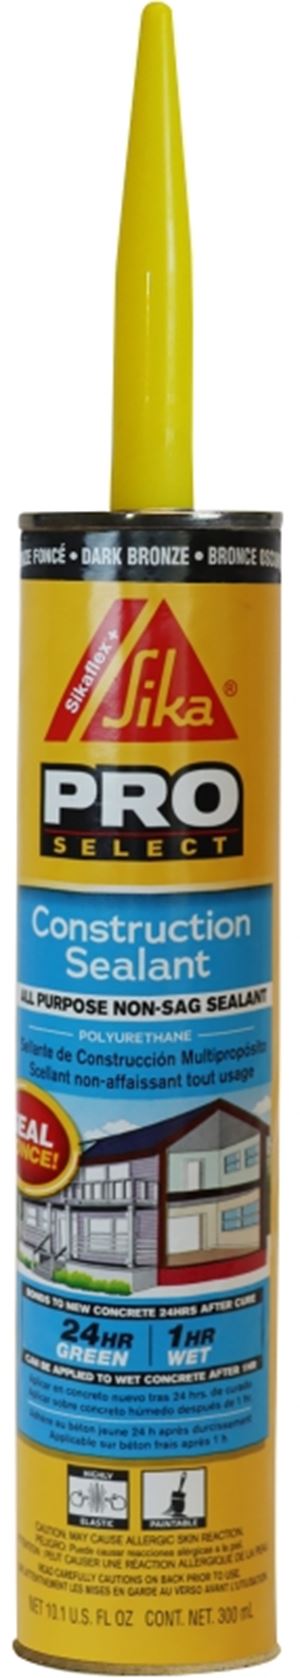 SIKA SIKAFLEX PRO SELECT Series 515310 Construction Sealant, Dark Bronze, 7 Days Curing, 40 to 100 deg F, 10.1 oz, Pack of 12